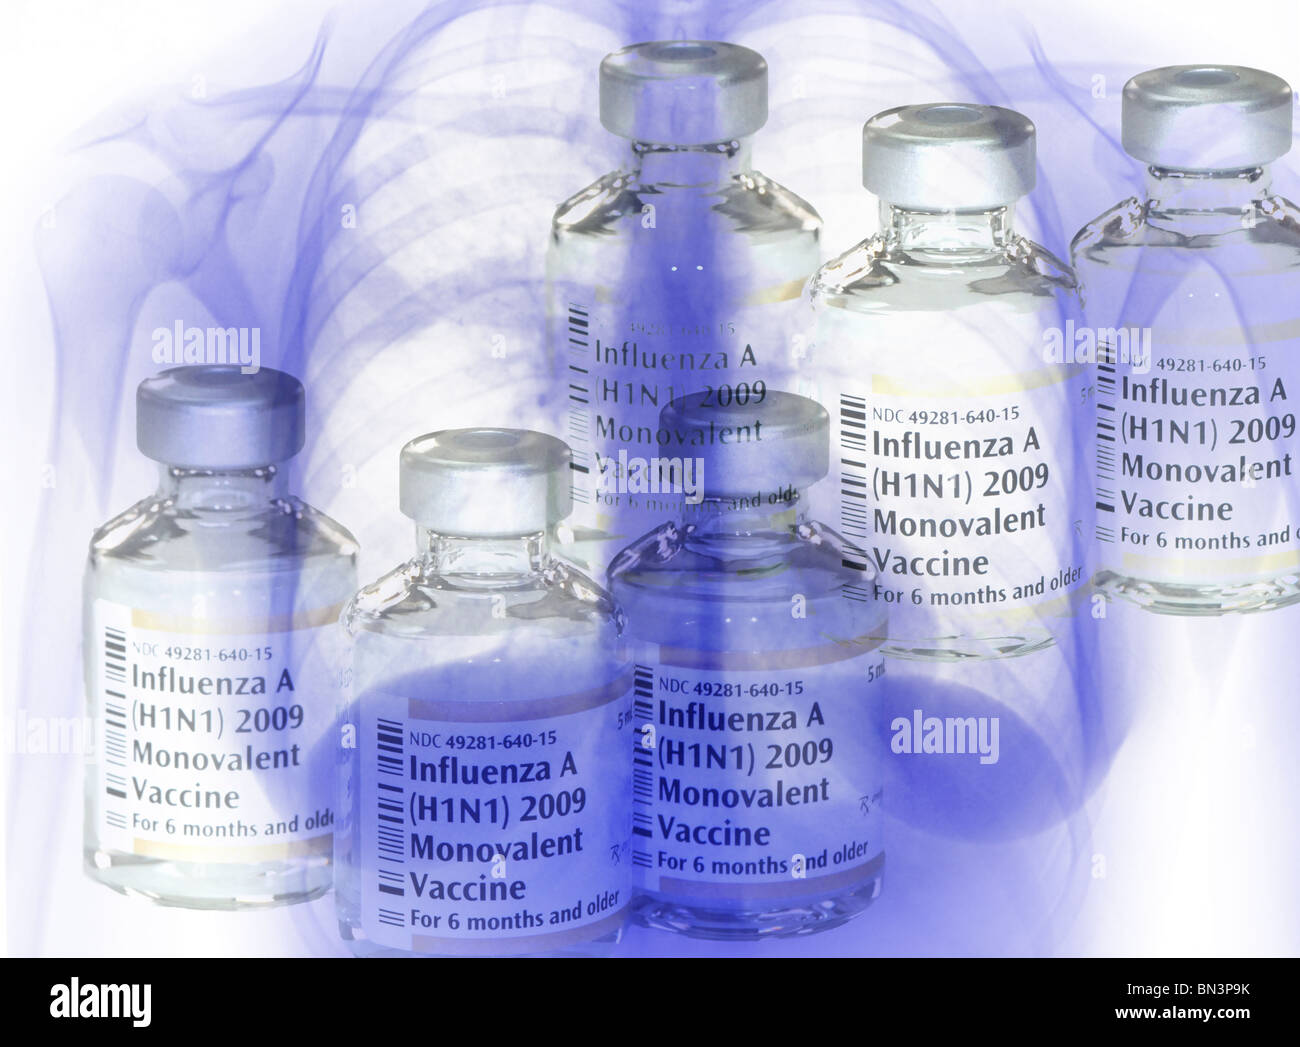 vials of the 2009 H1N1 swine flu vaccine superimposed on a chest x-ray of a patient with swine flu pneumonia Stock Photo